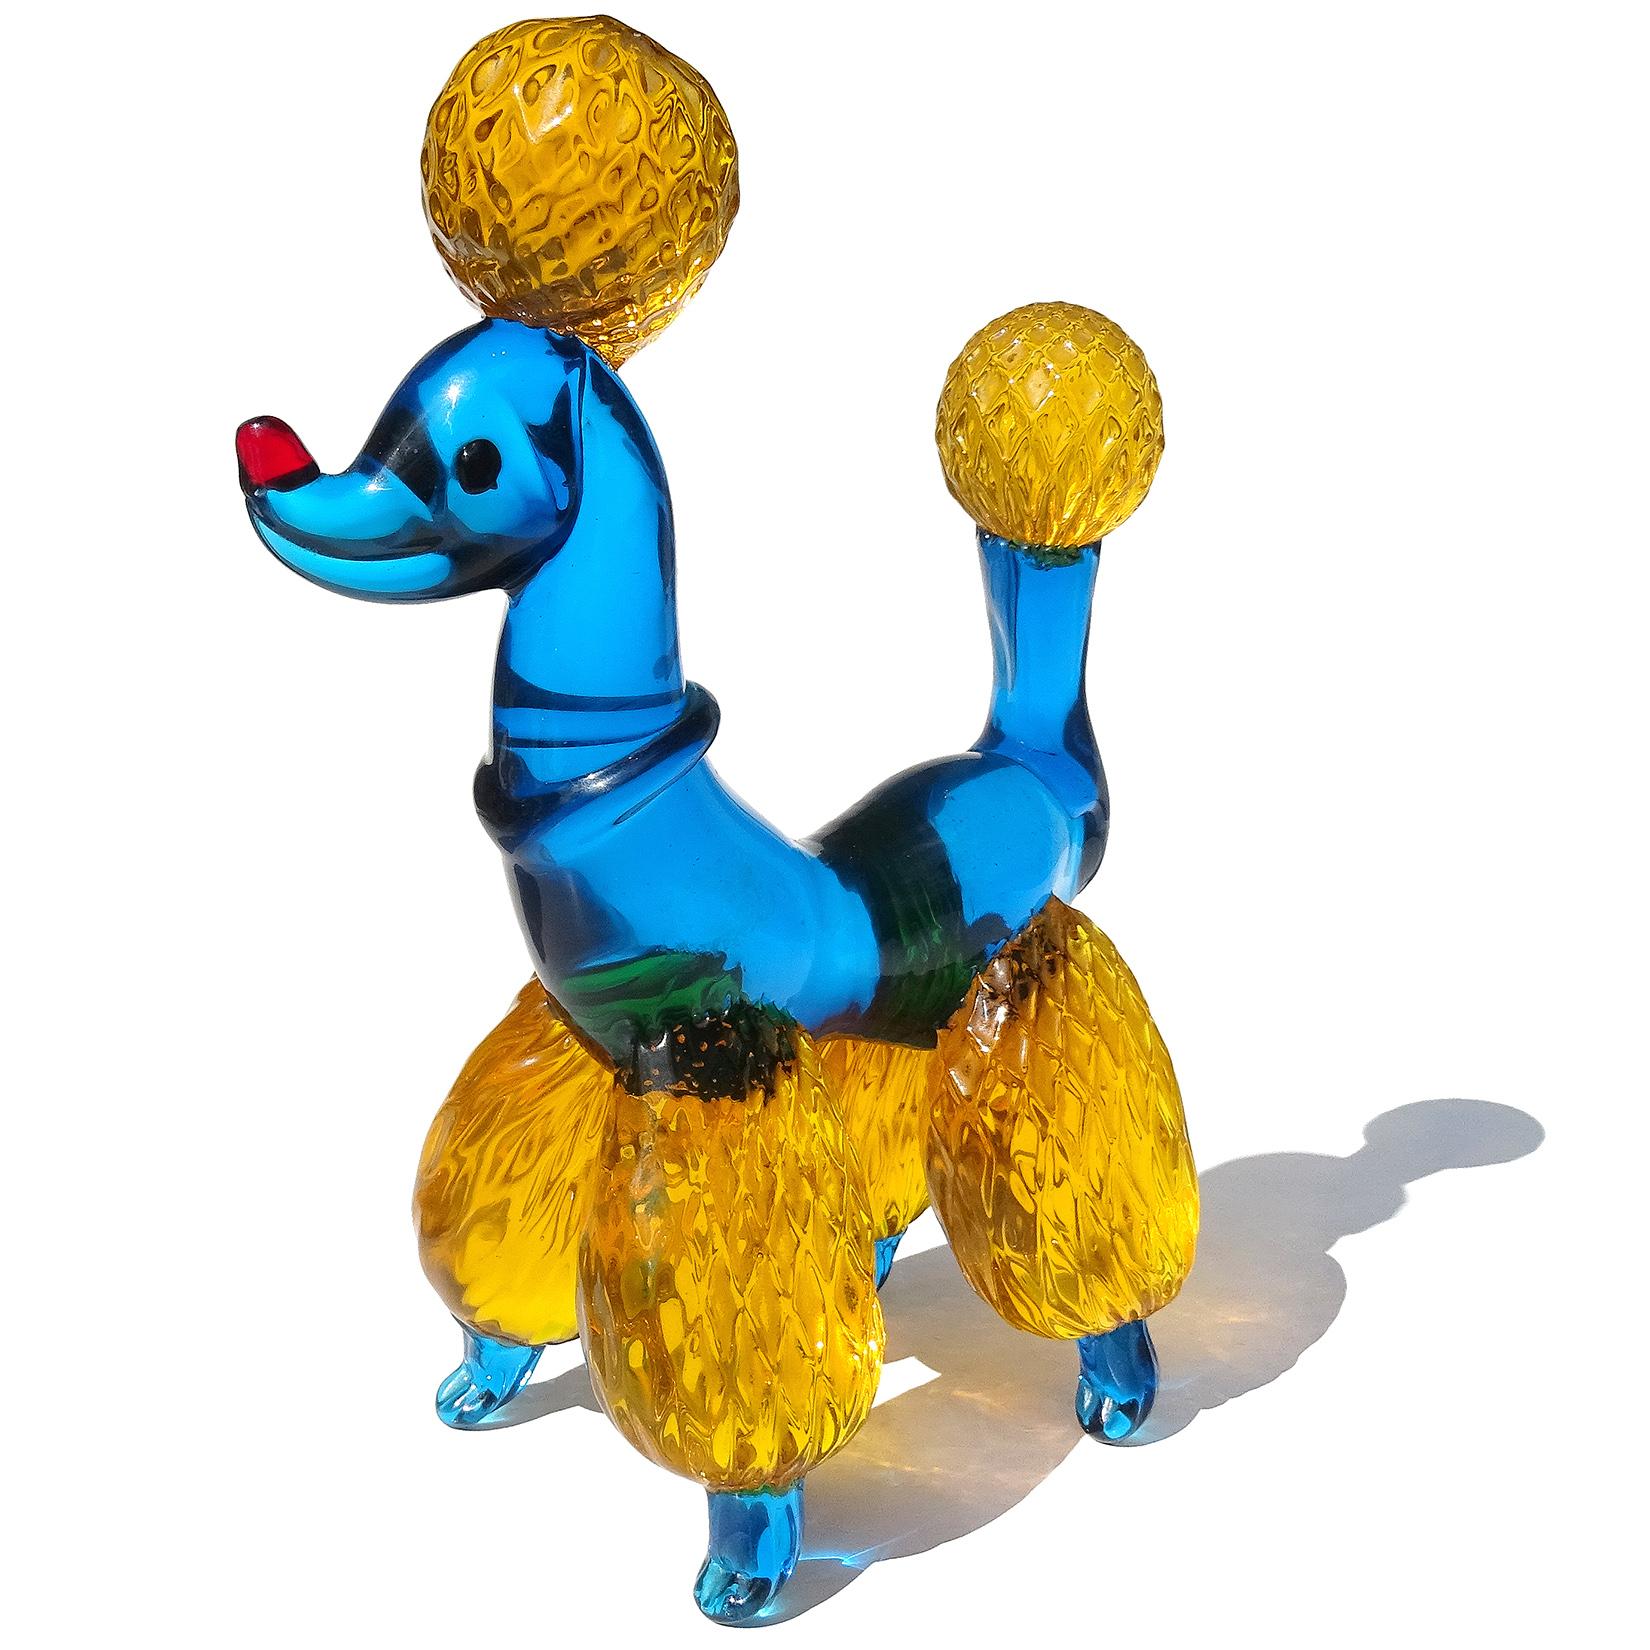 Beautiful vintage Murano hand blown cobalt blue and orange Italian art glass poodle puppy dog sculpture. It has a diamond quilted pom-pom design on the legs, tail and puff on its head. There is a blue collar around the neck, red nose, and applied